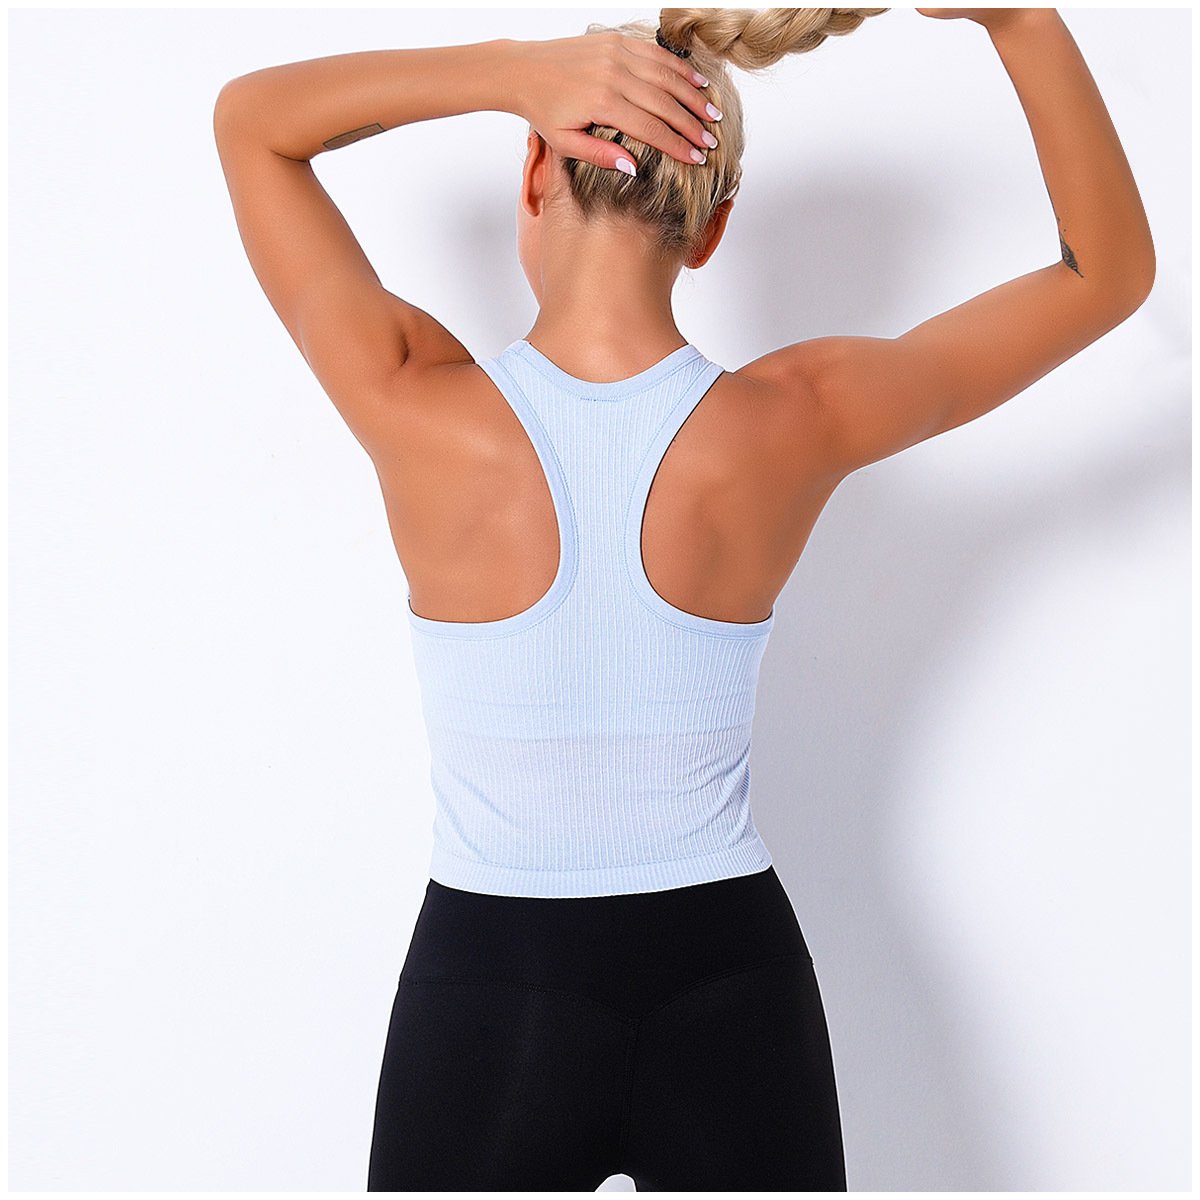 High-Quality RIBBED Workout Fitness Gym Crop Top Vest Women Push Up Padded Fitness Training Sports Bras Top Ultra Thin Skin Garm